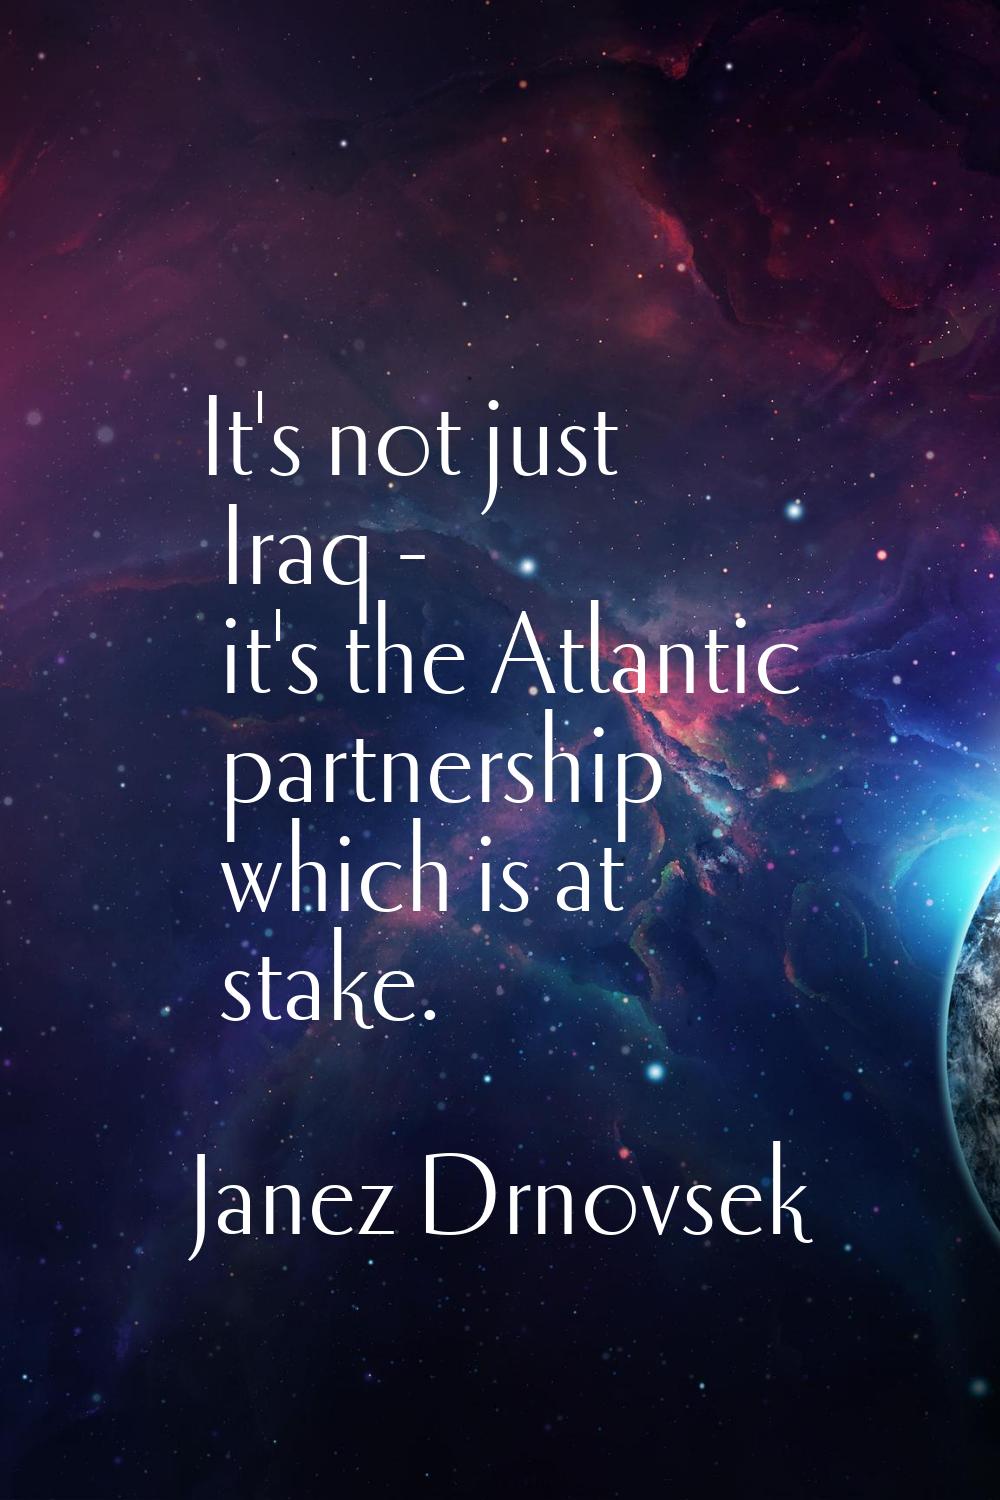 It's not just Iraq - it's the Atlantic partnership which is at stake.